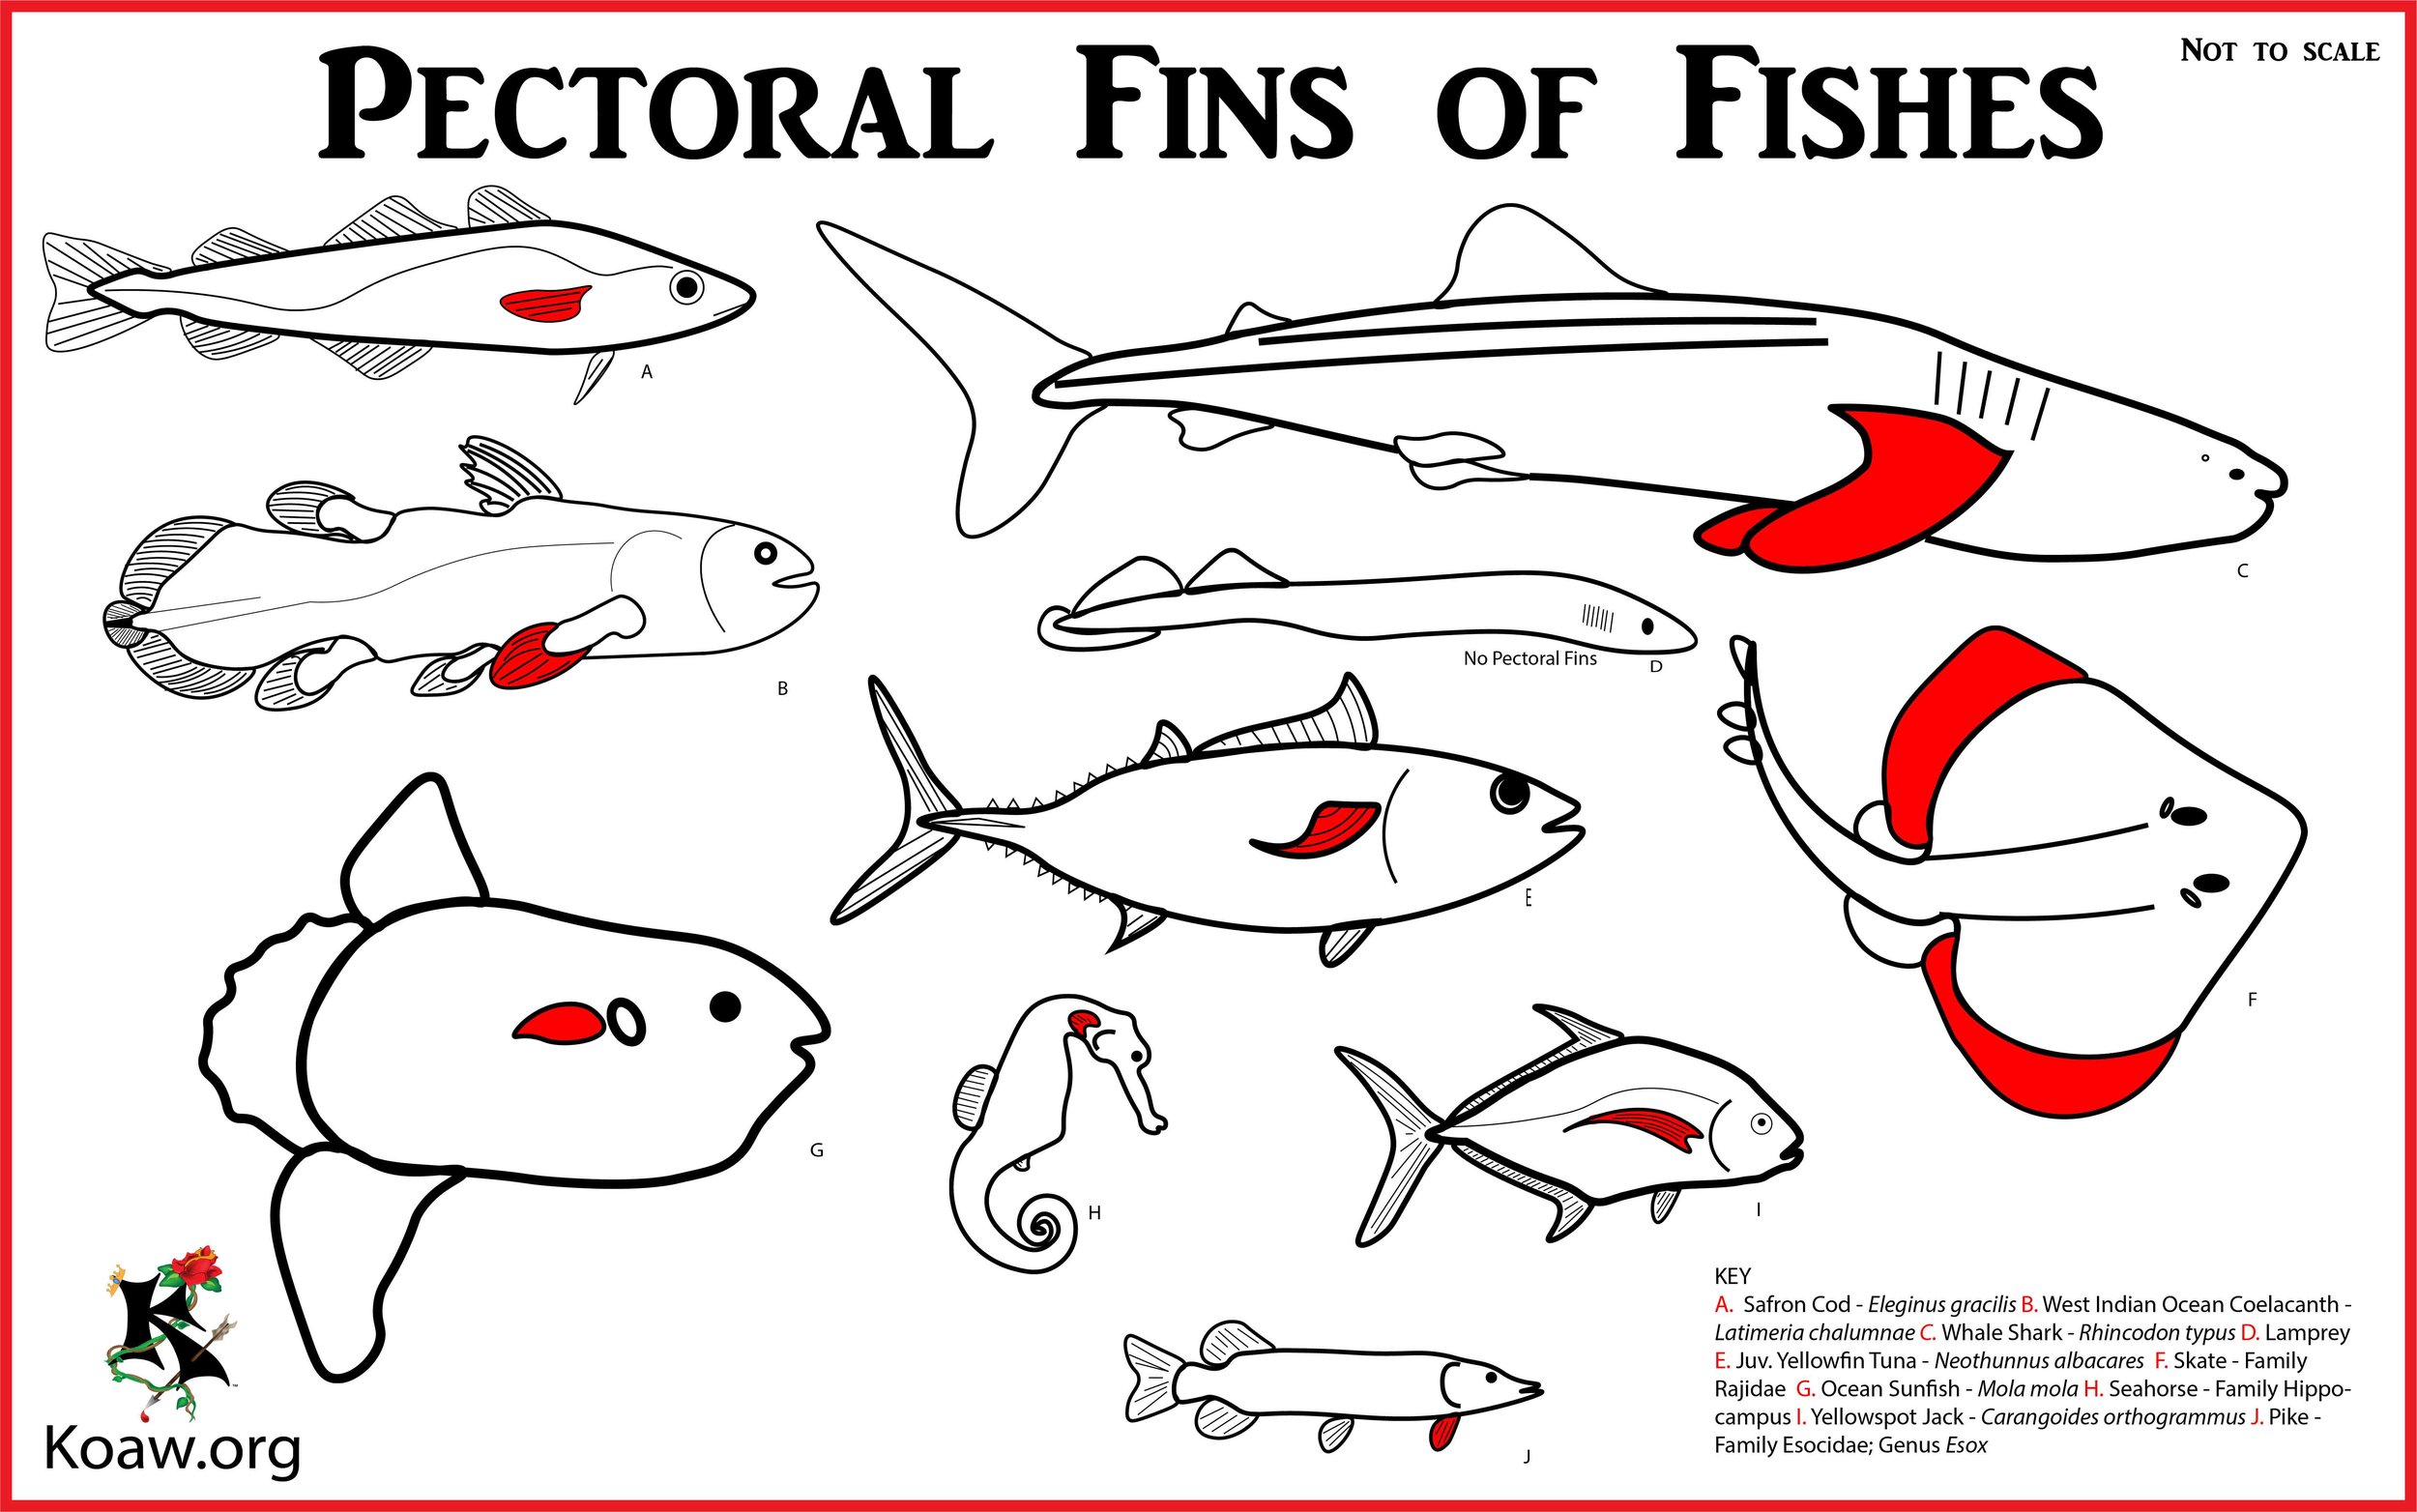 Pectoral Fins of Fishes - Illustration by Koaw